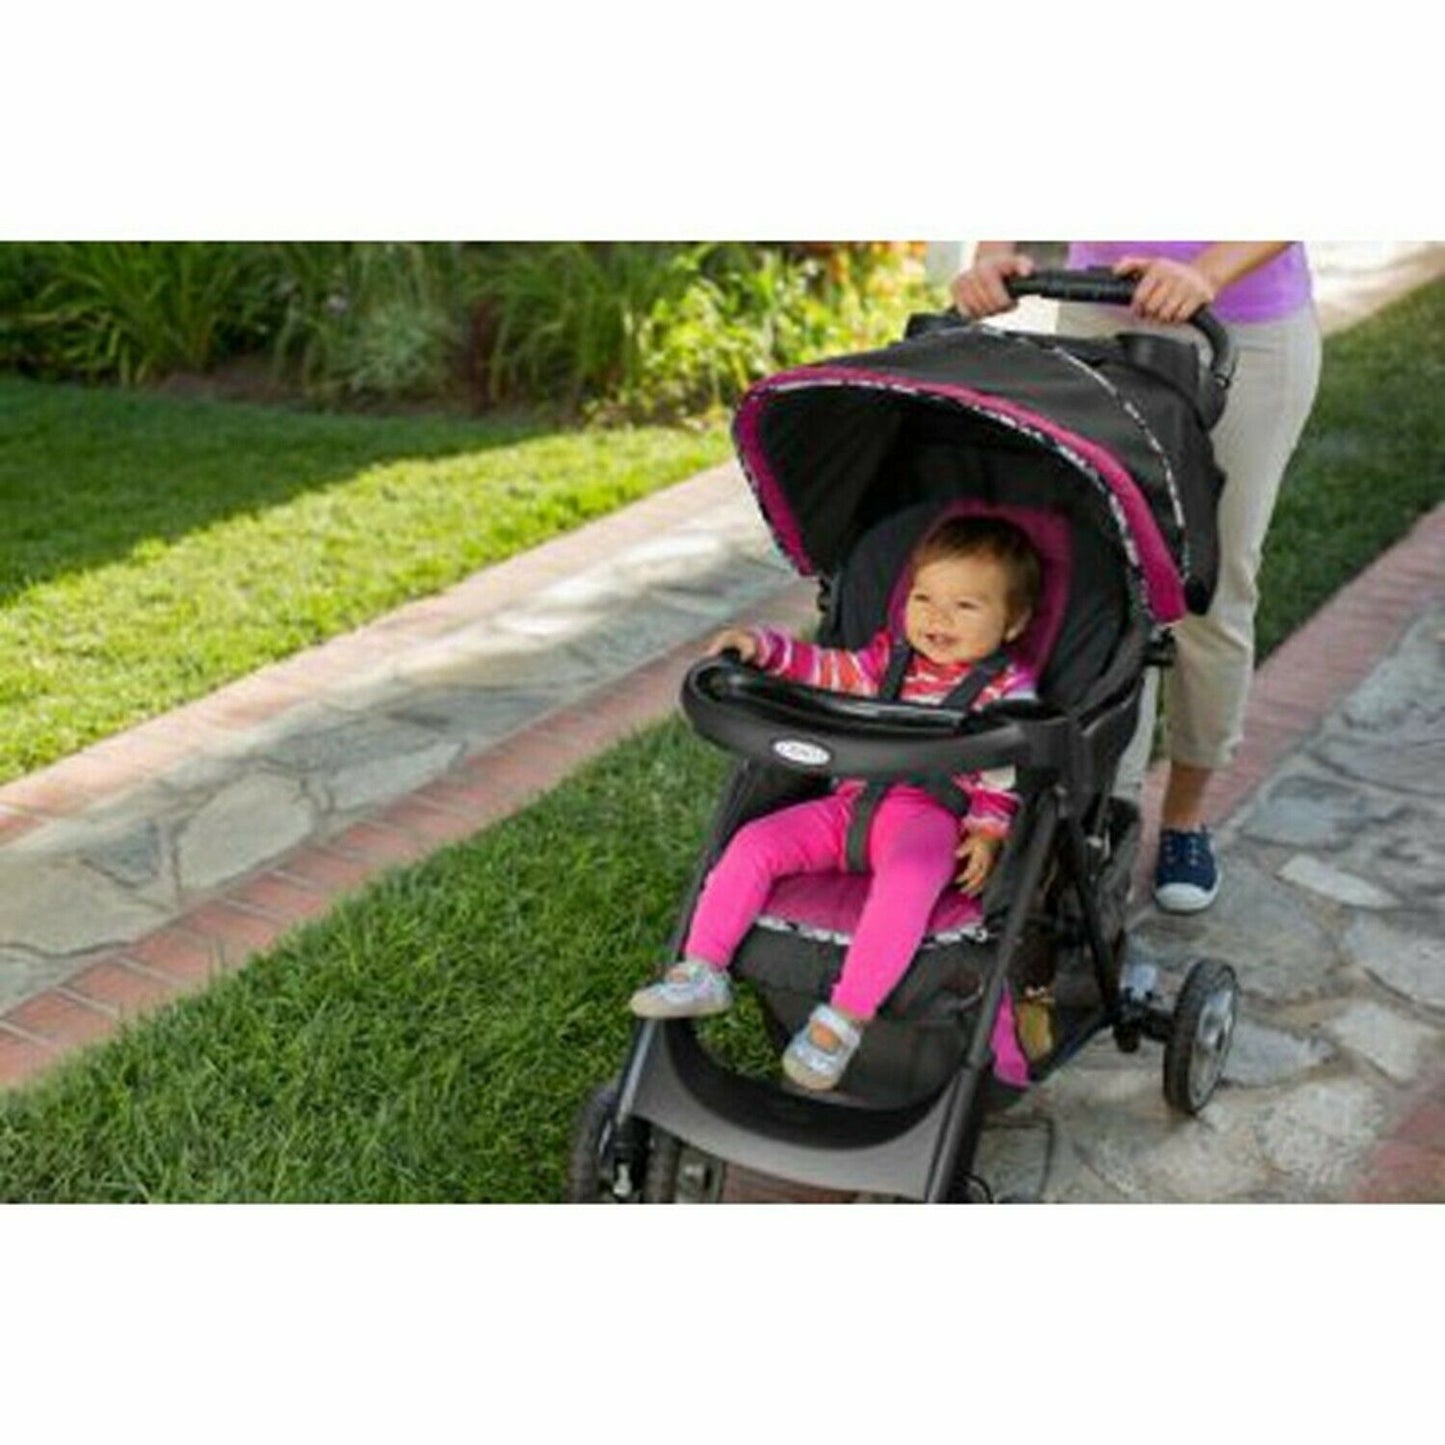 Comfort Baby Stroller with Car Seat Travel System Newborn Playard Chair Combo